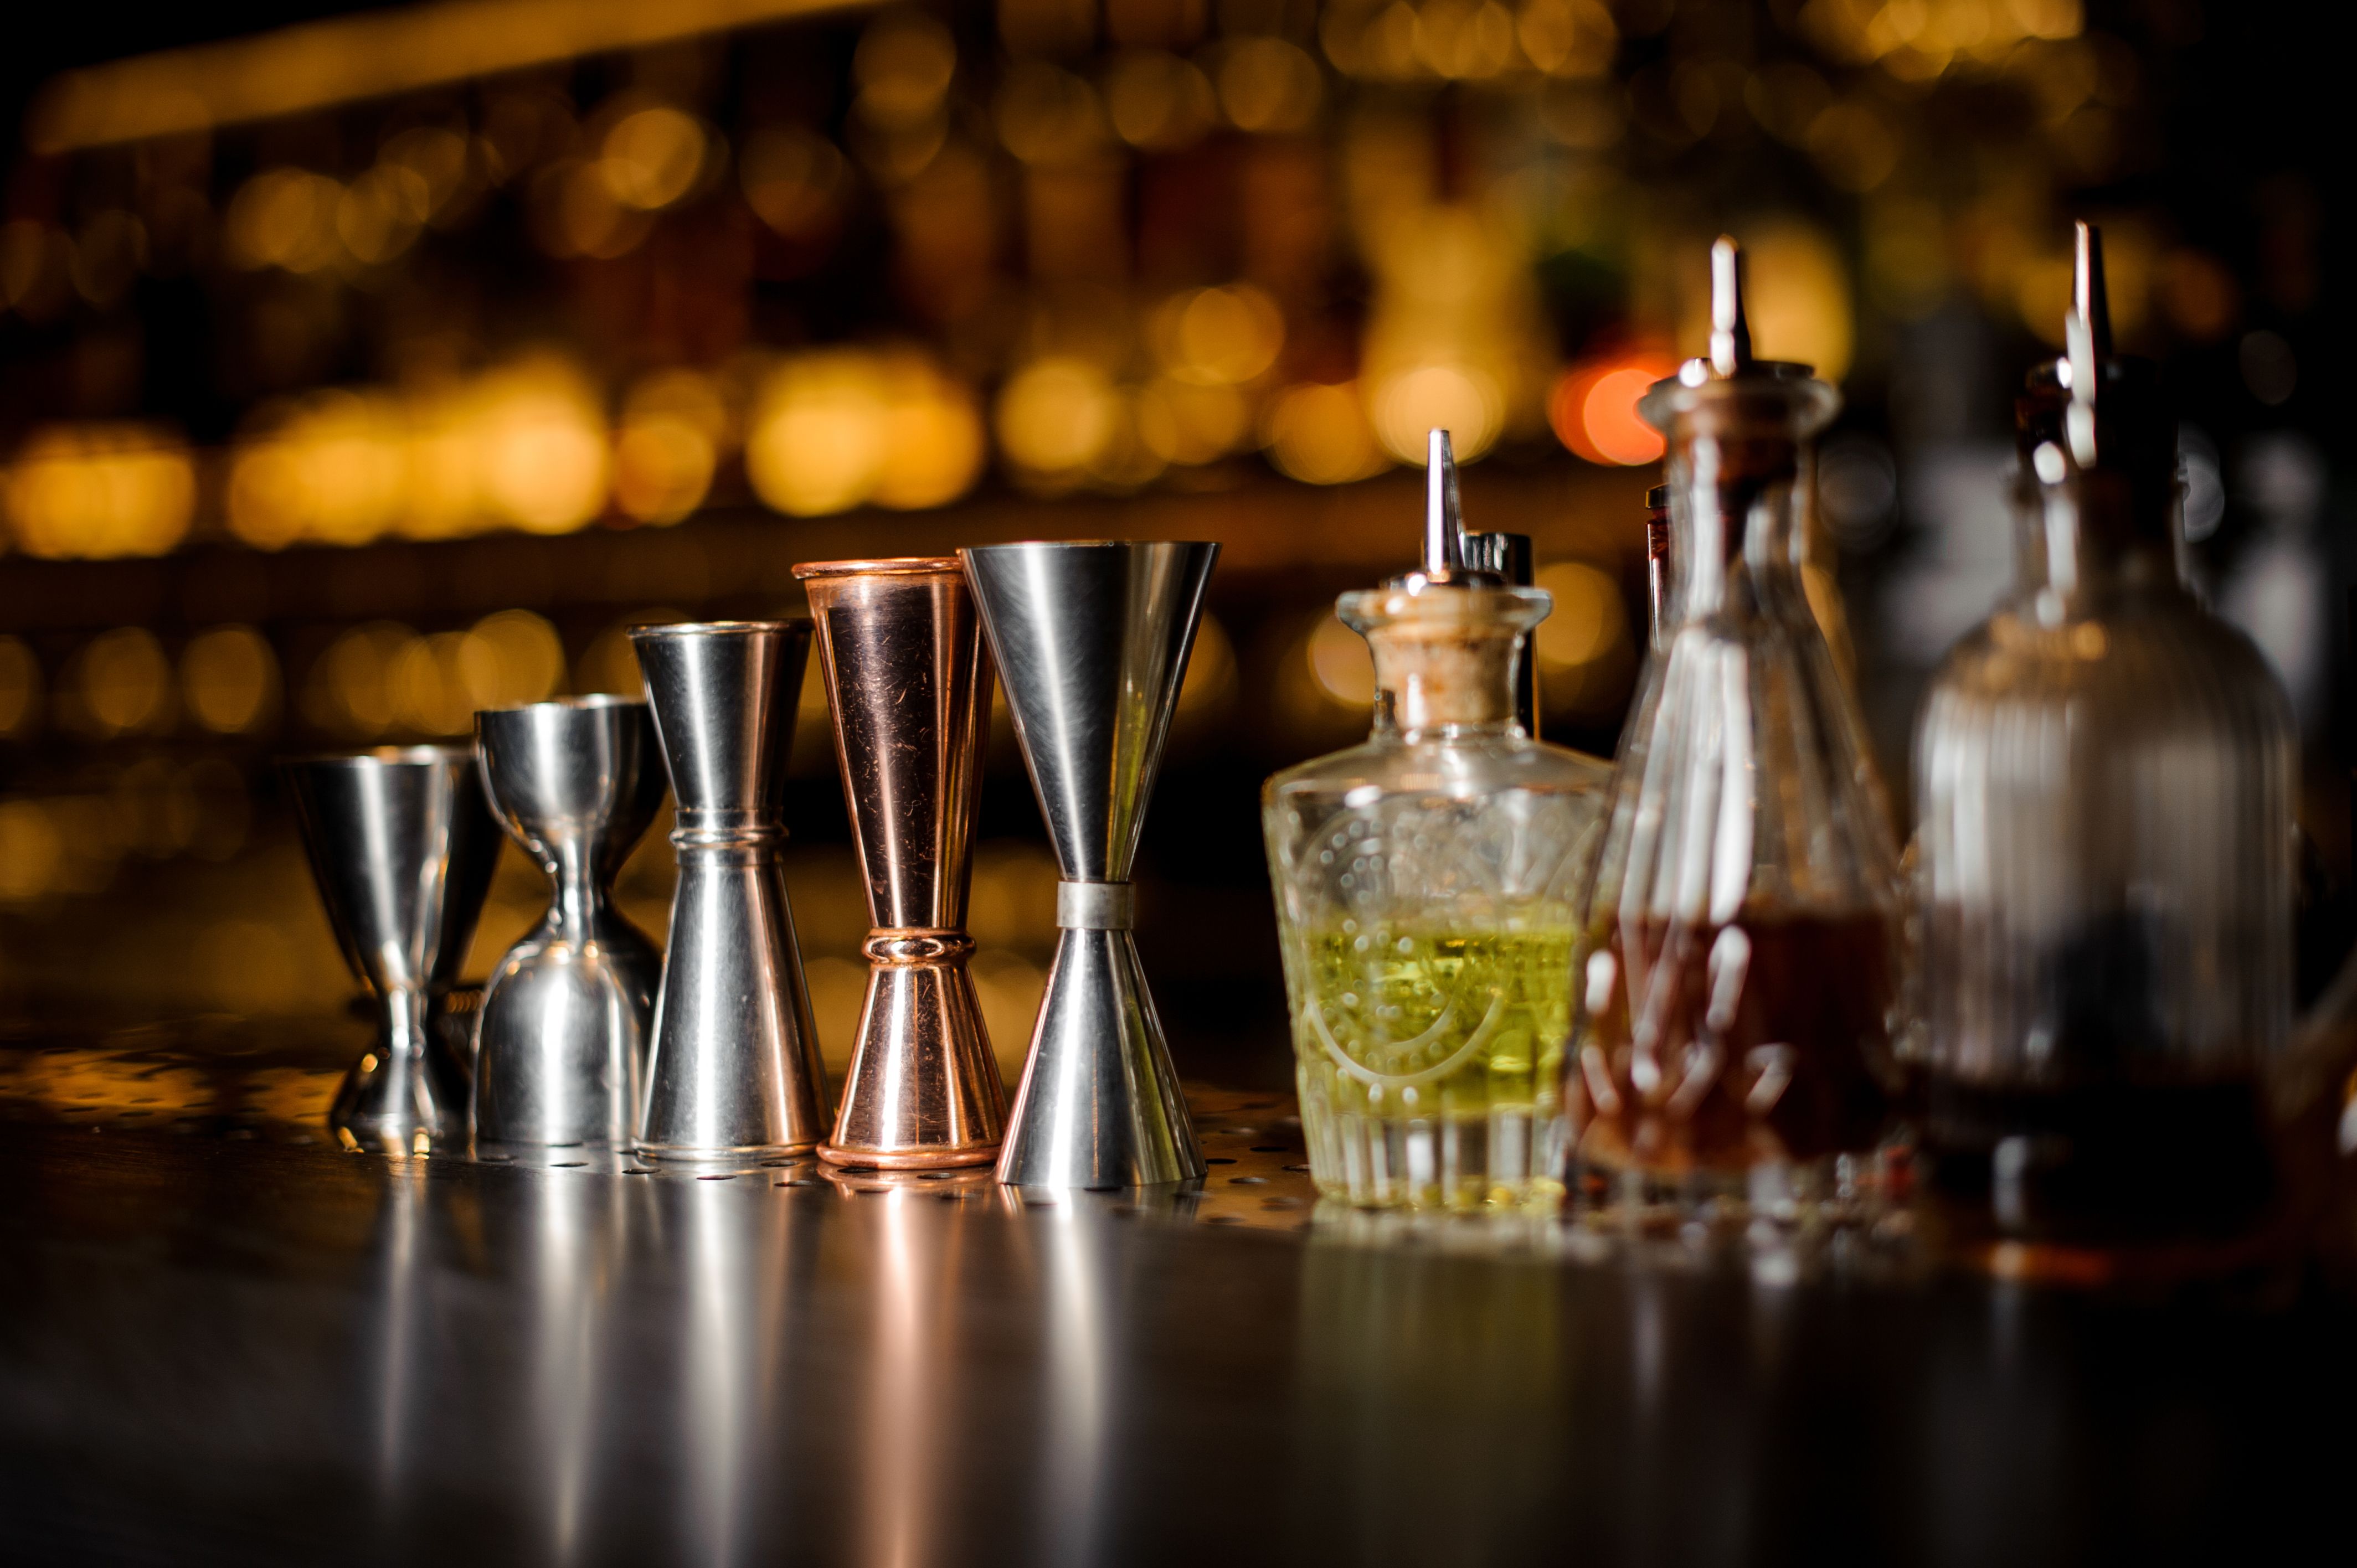 Barman Equipment Such As Measuring Cups And Essence Royalty Free Image 1062066858 1557252311 